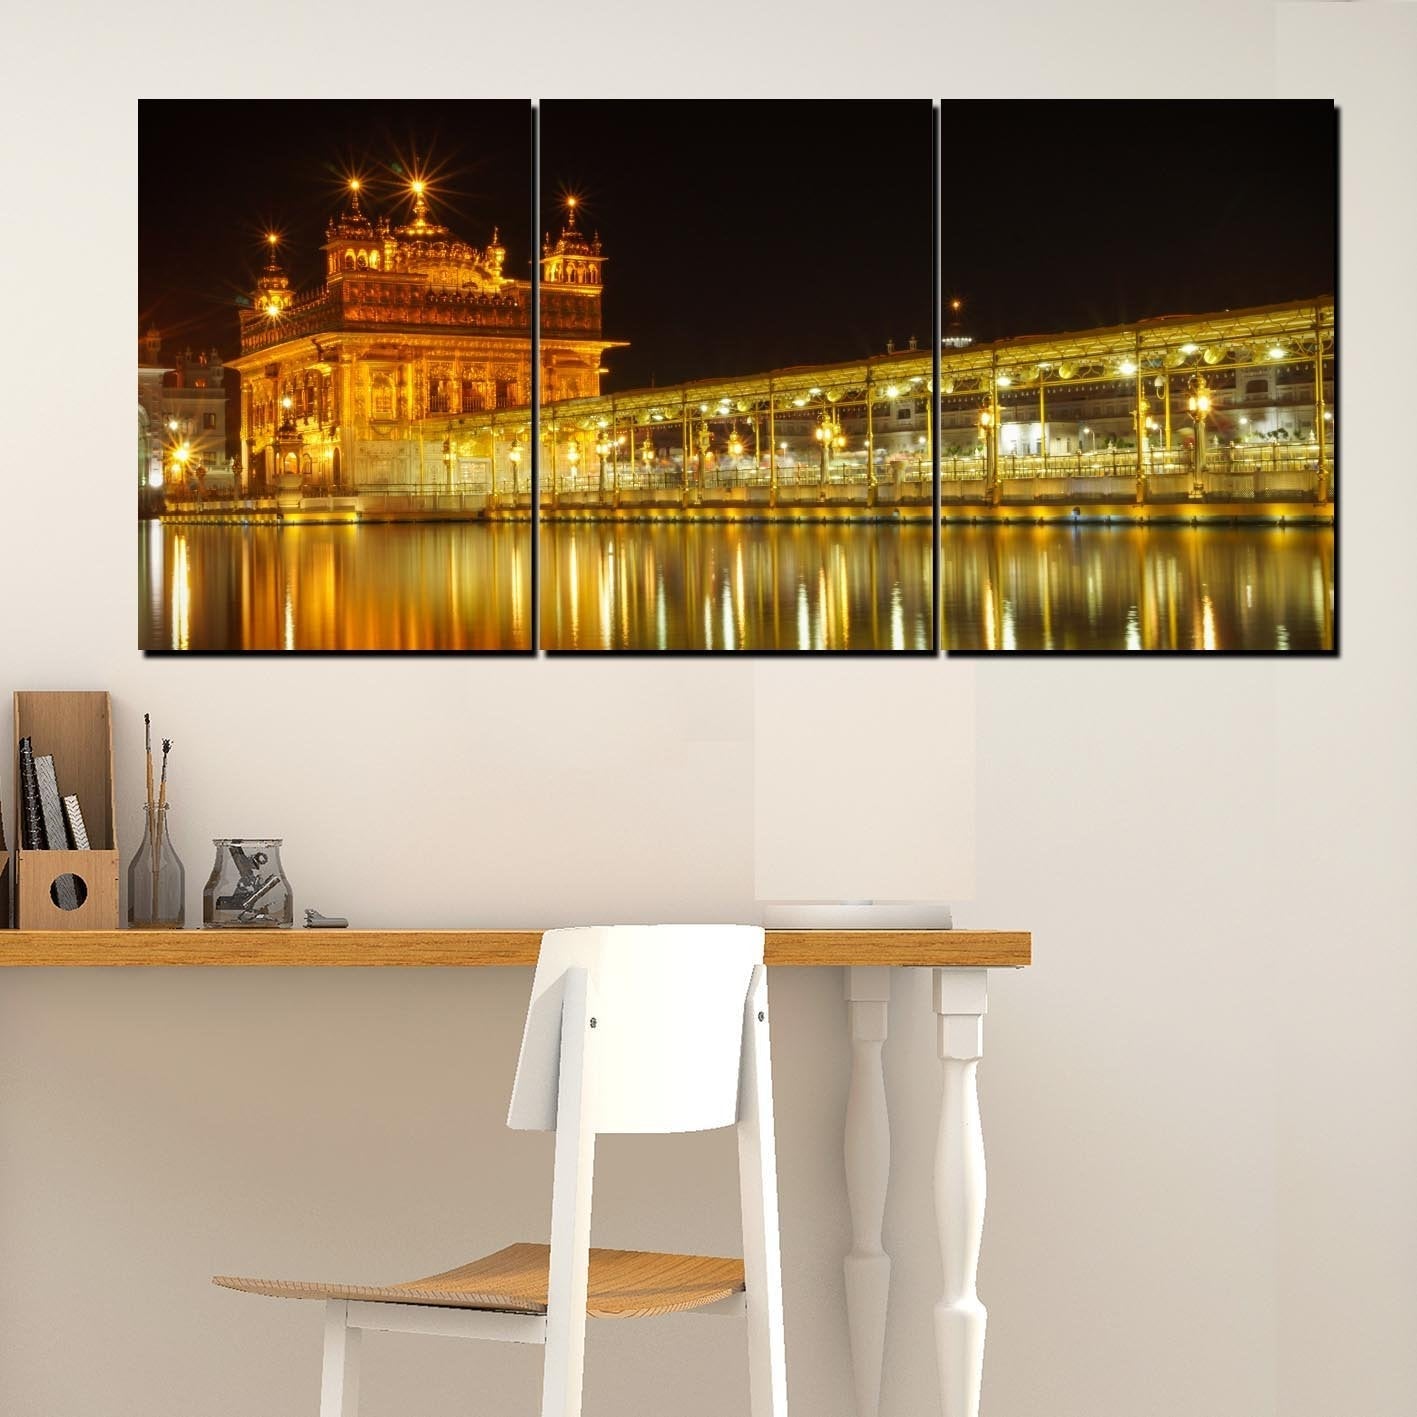 https://cdn.shopify.com/s/files/1/0387/9986/8044/products/Golden_Temple_3_Panel_1.jpg